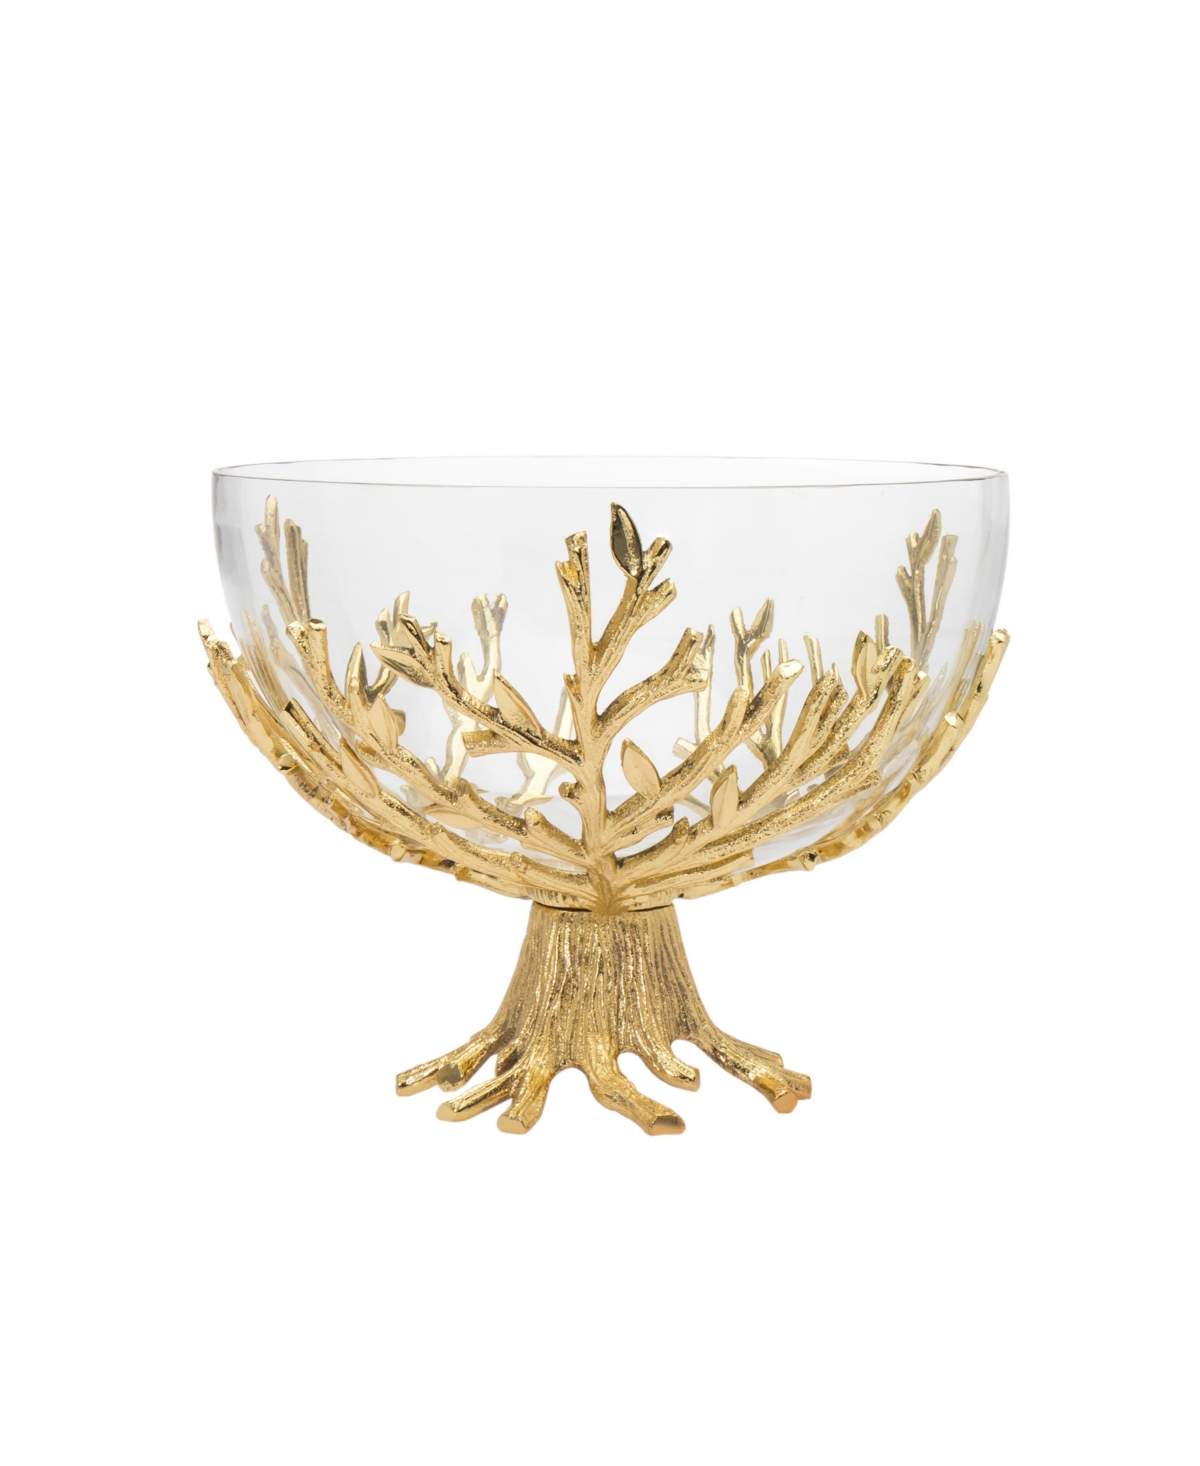 Branch Stand with Glass Bowl Set, 2 Piece - Gold-Tone